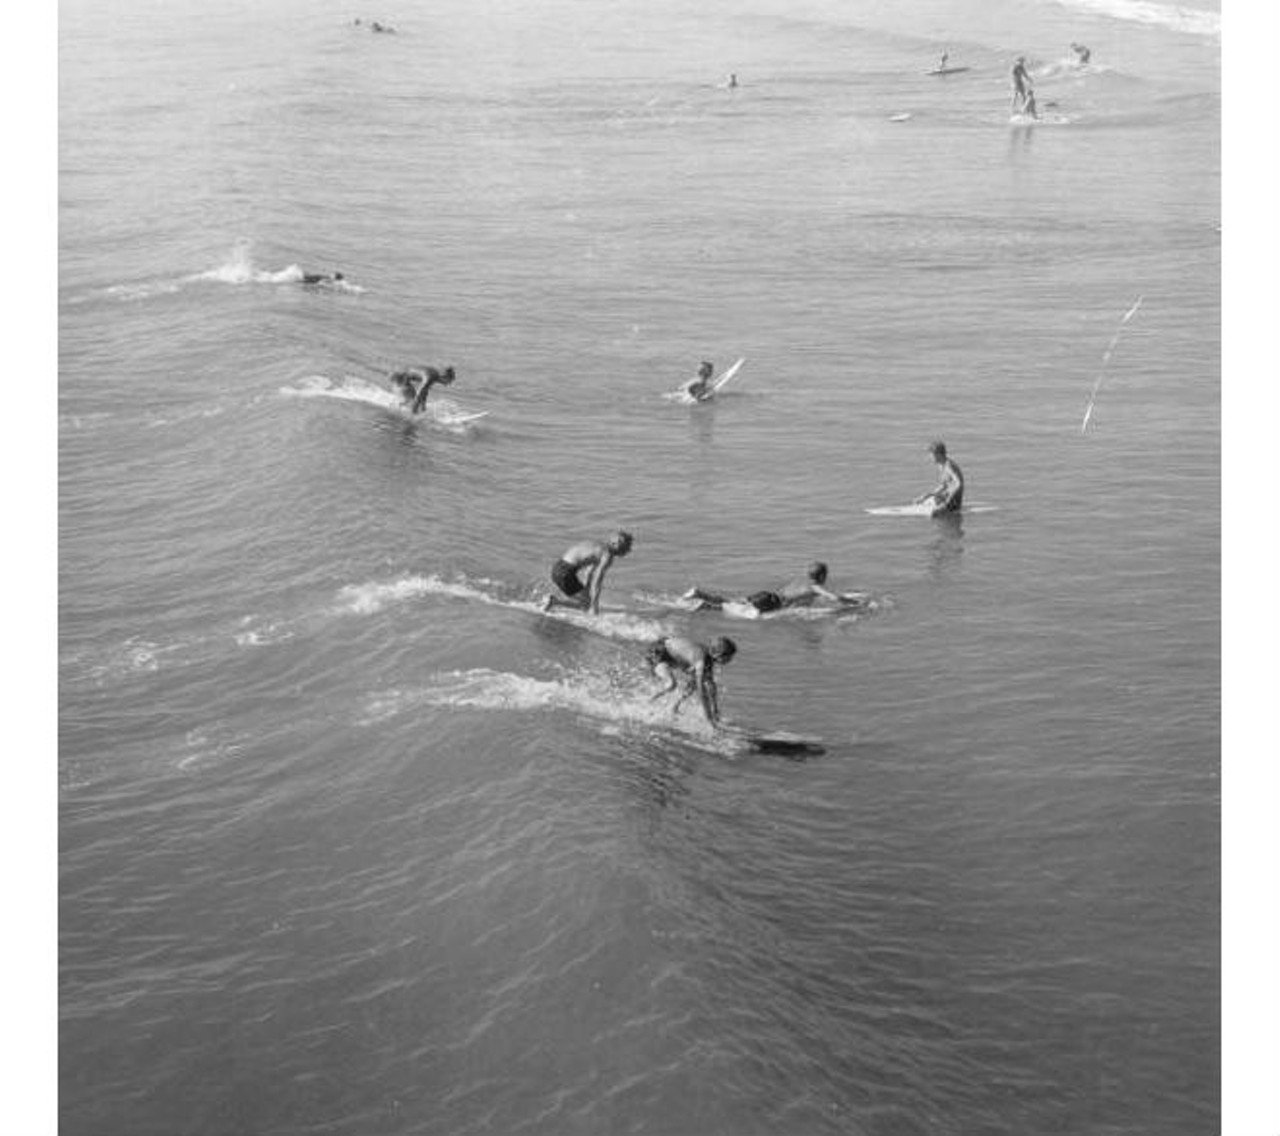 Surfers at the beach, 1970